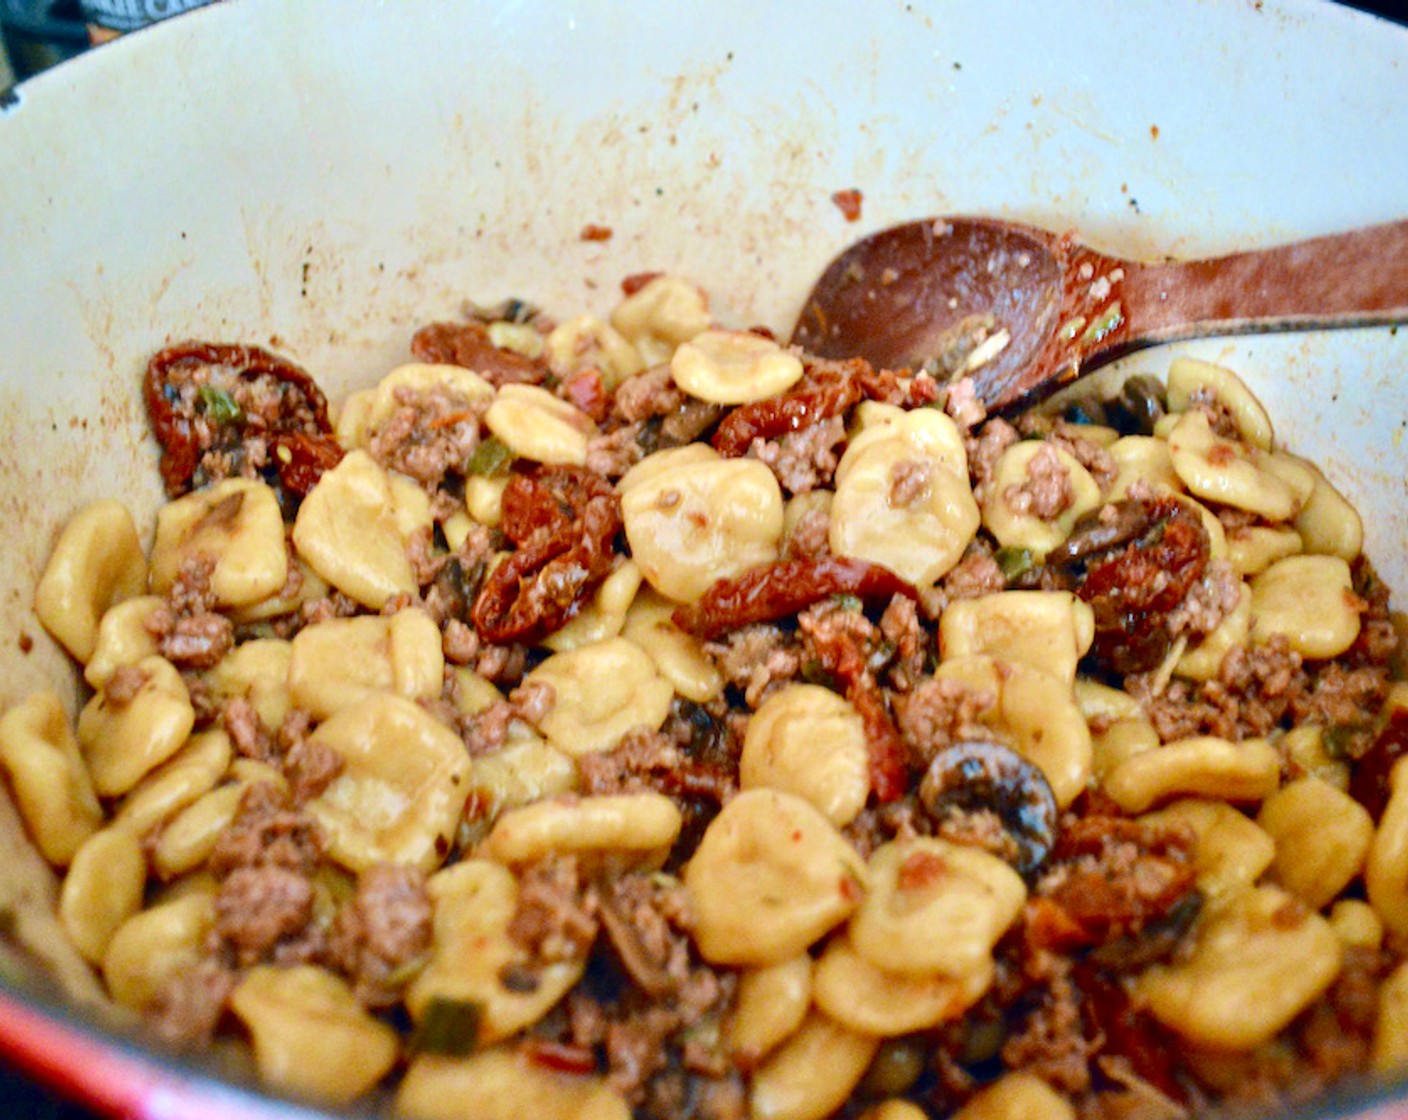 step 6 Drain the pasta when it's tender and toss it into the pot with the sausage and mushroom mixture. Stir thoroughly.